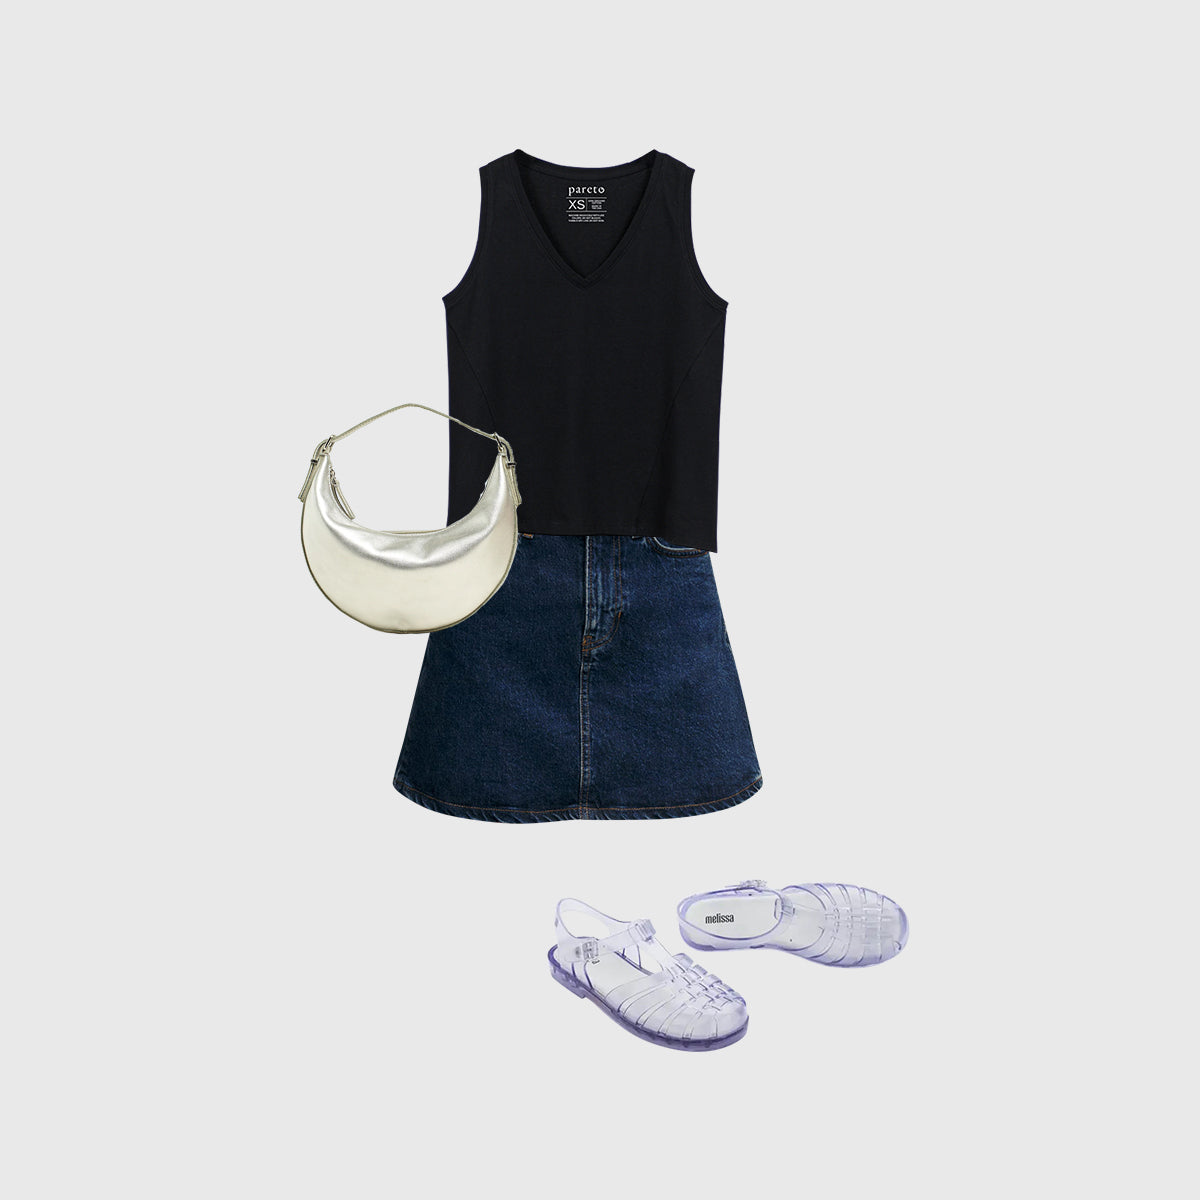 Quirky Cool Tank Top Look